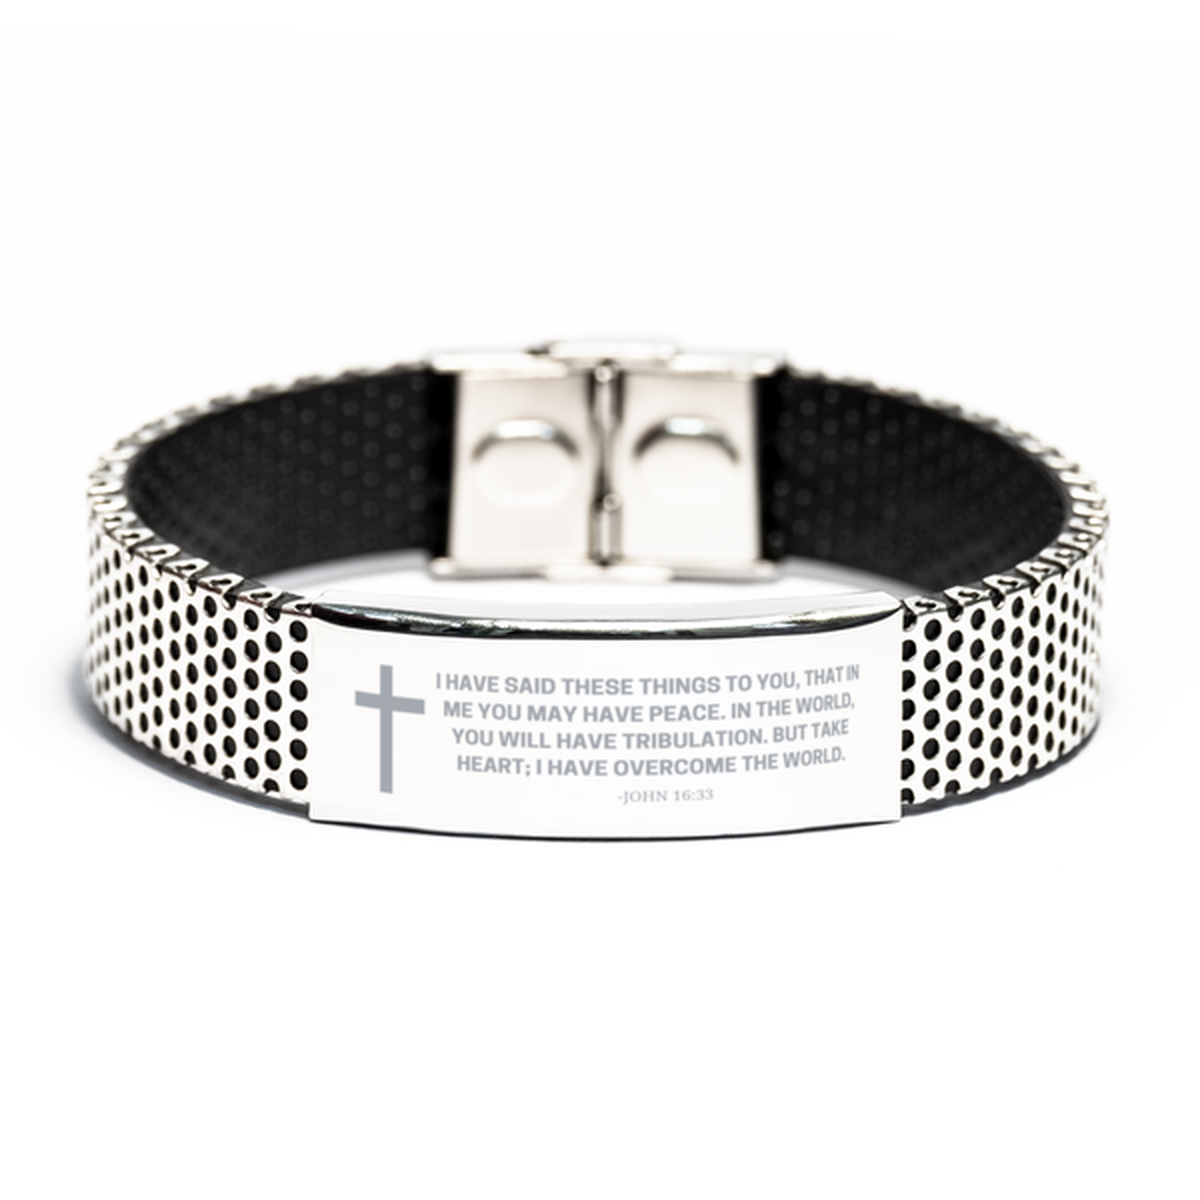 Baptism Gifts For Teenage Boys Girls, Christian Bible Verse Stainless Steel Bracelet, I have said these things, Catholic Confirmation Gifts for Son, Godson, Grandson, Nephew